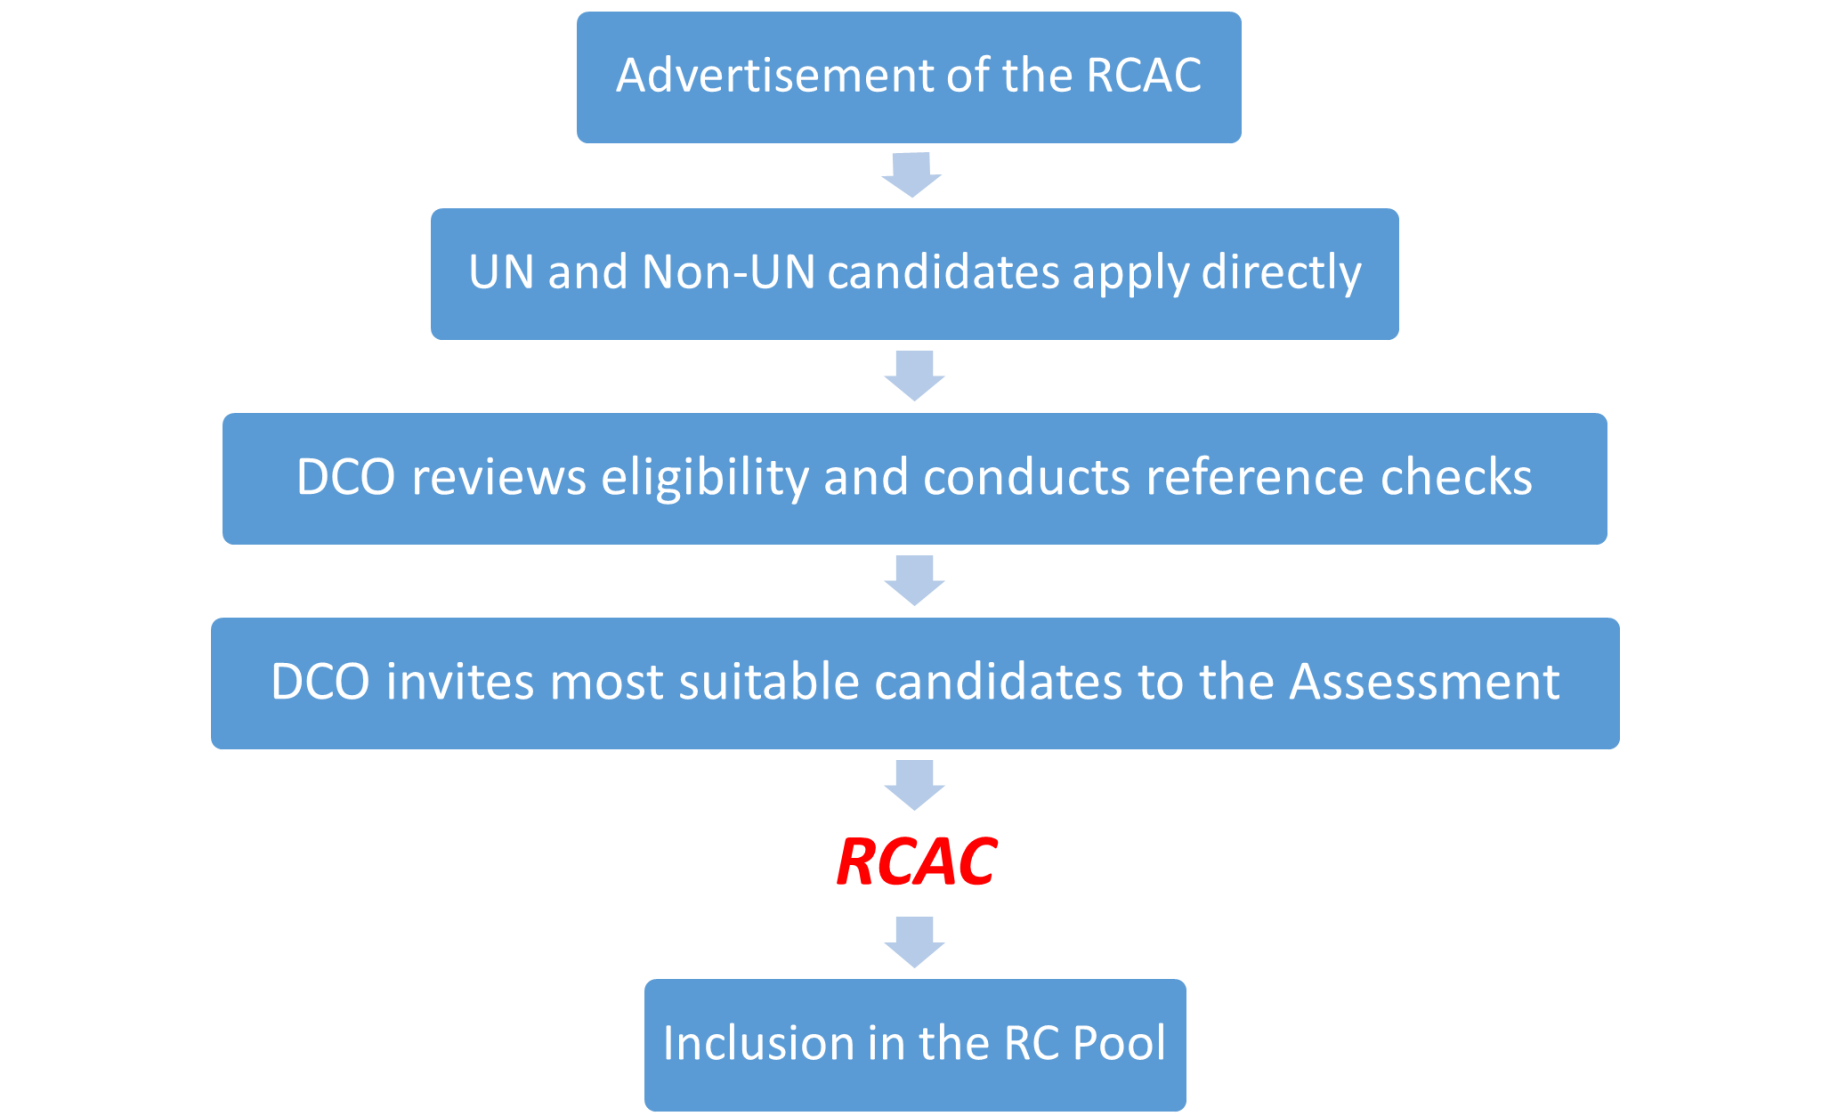 This is a graph that explains the steps from application to the RCAC to selection in the RC pool